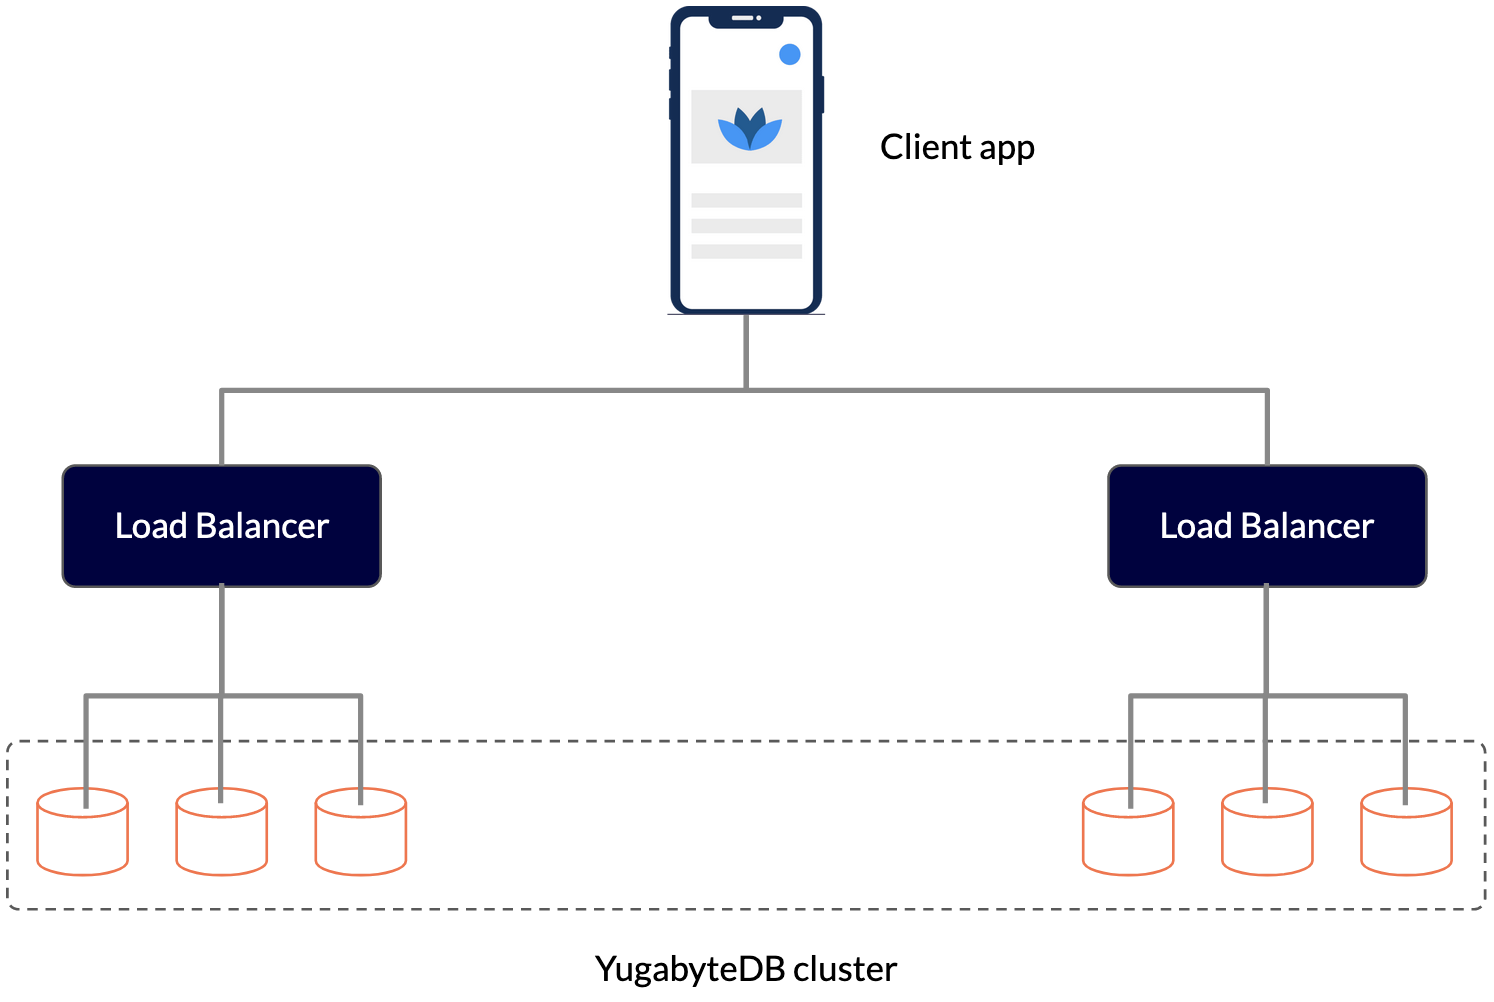 Connecting to a YugabyteDB cluster using external load balancers